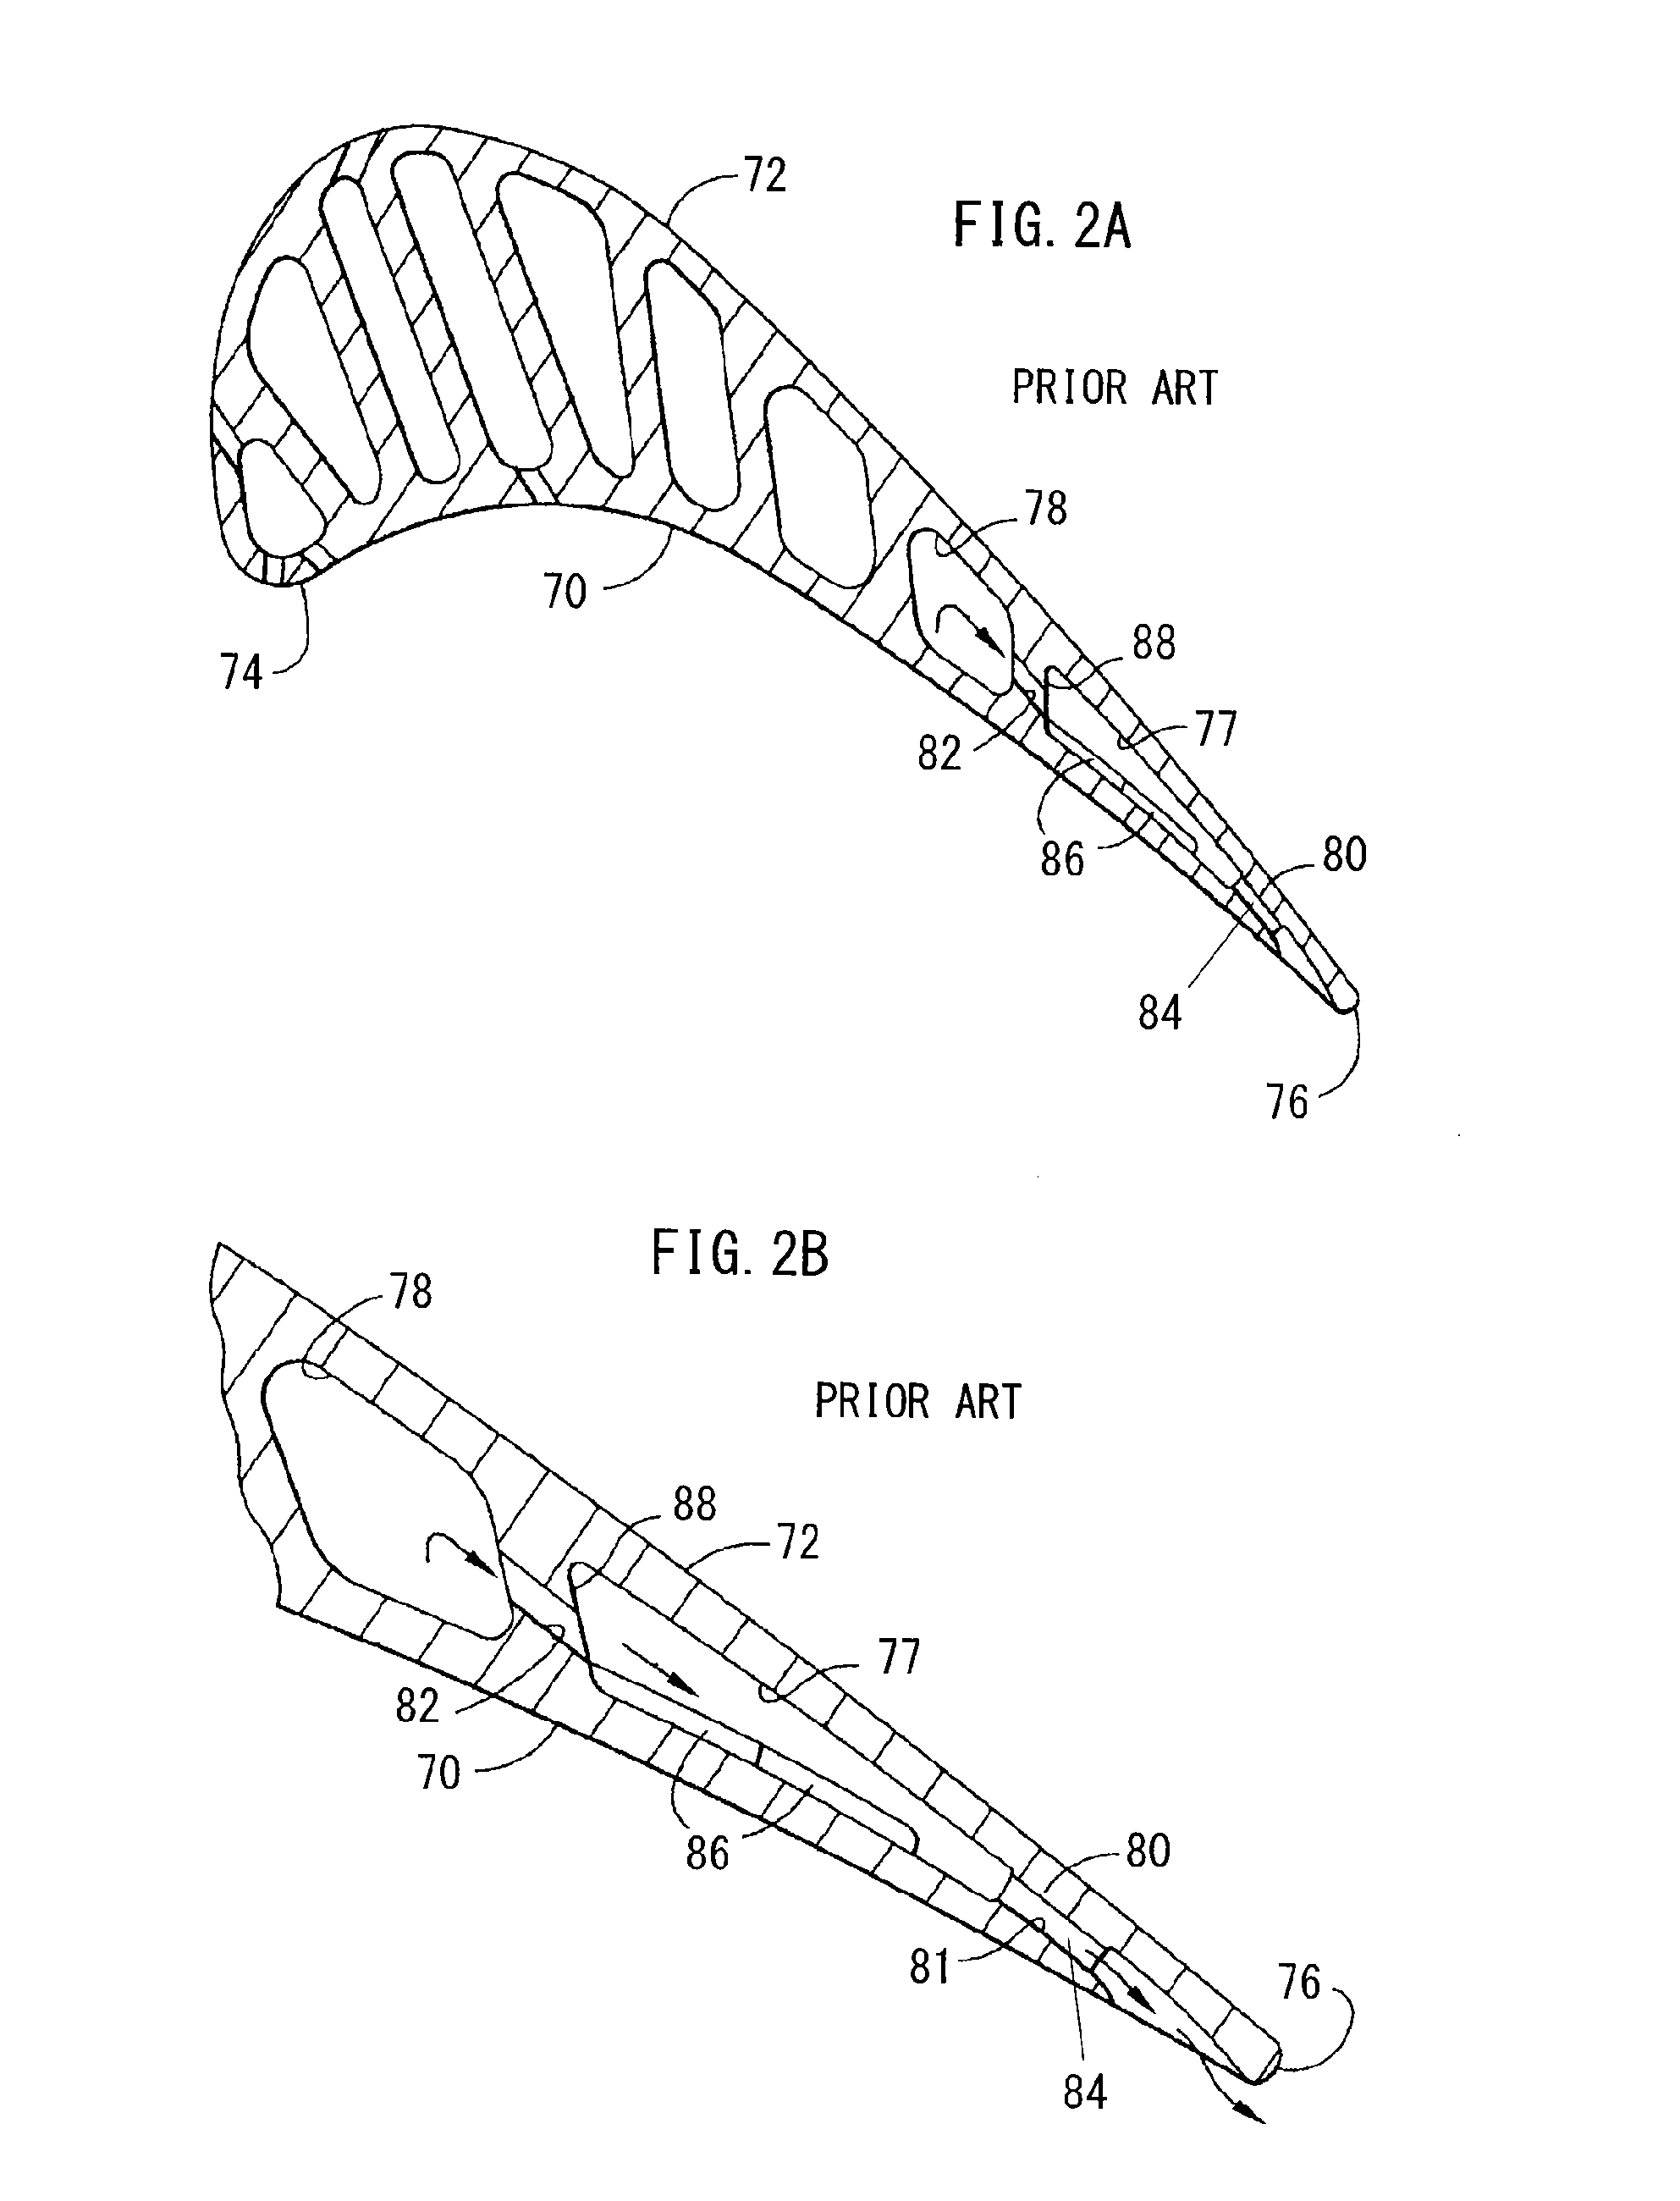 Cooling structure of turbine airfoil